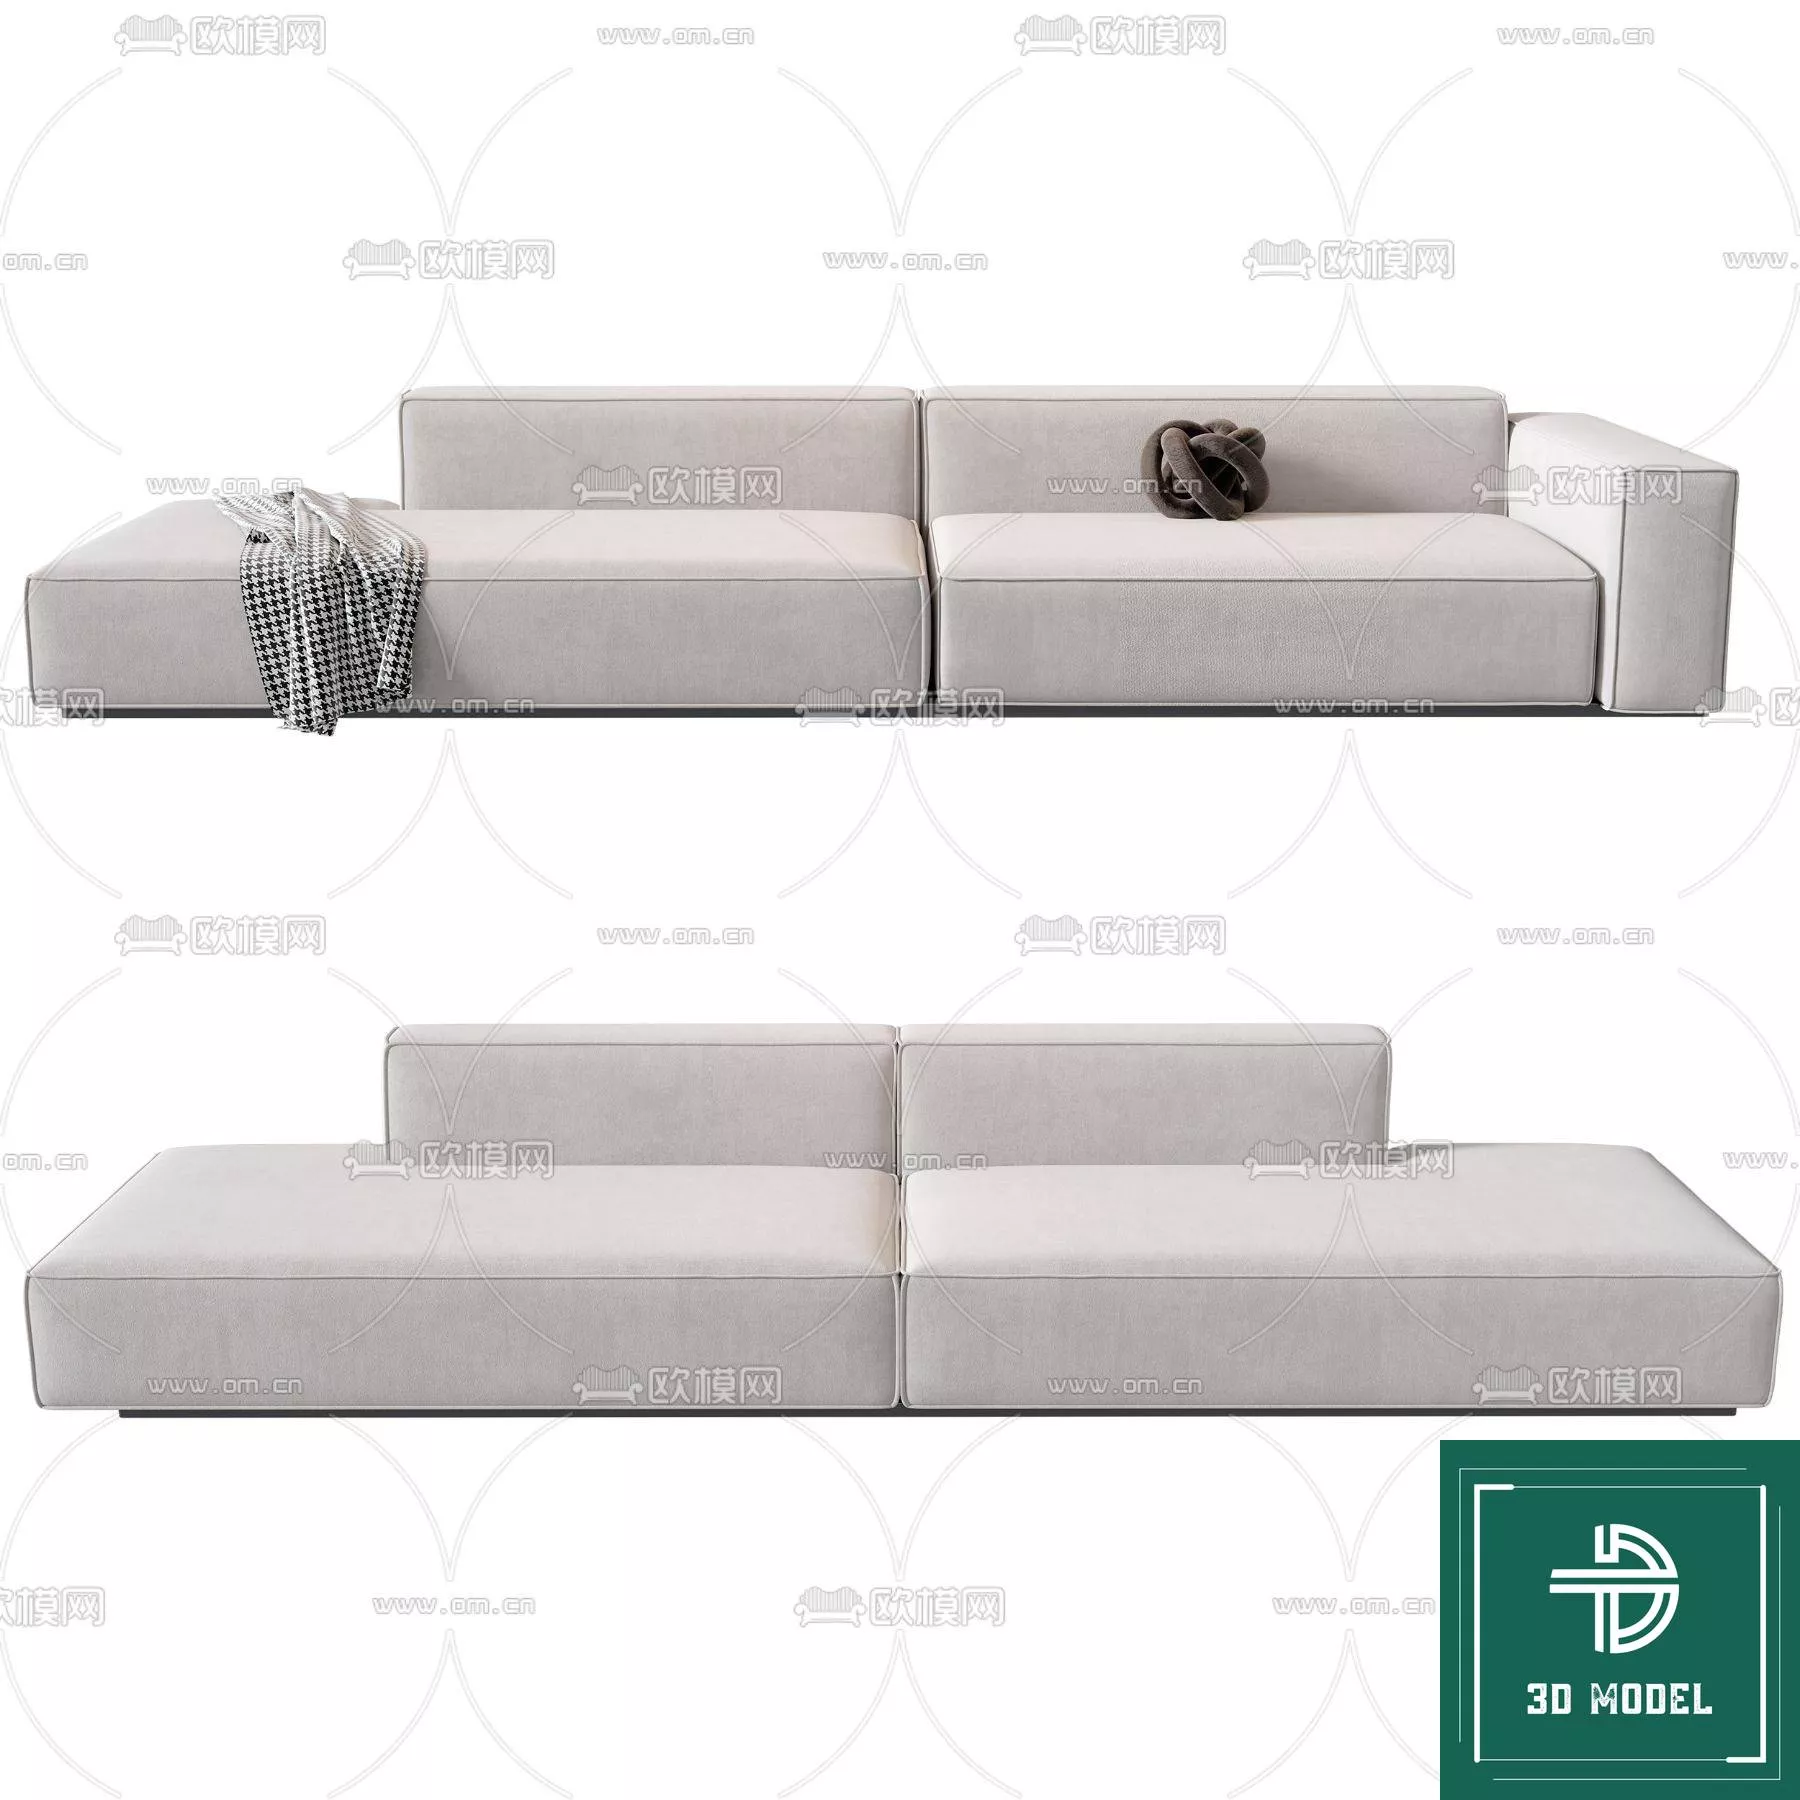 MODERN SOFA - SKETCHUP 3D MODEL - VRAY OR ENSCAPE - ID13221